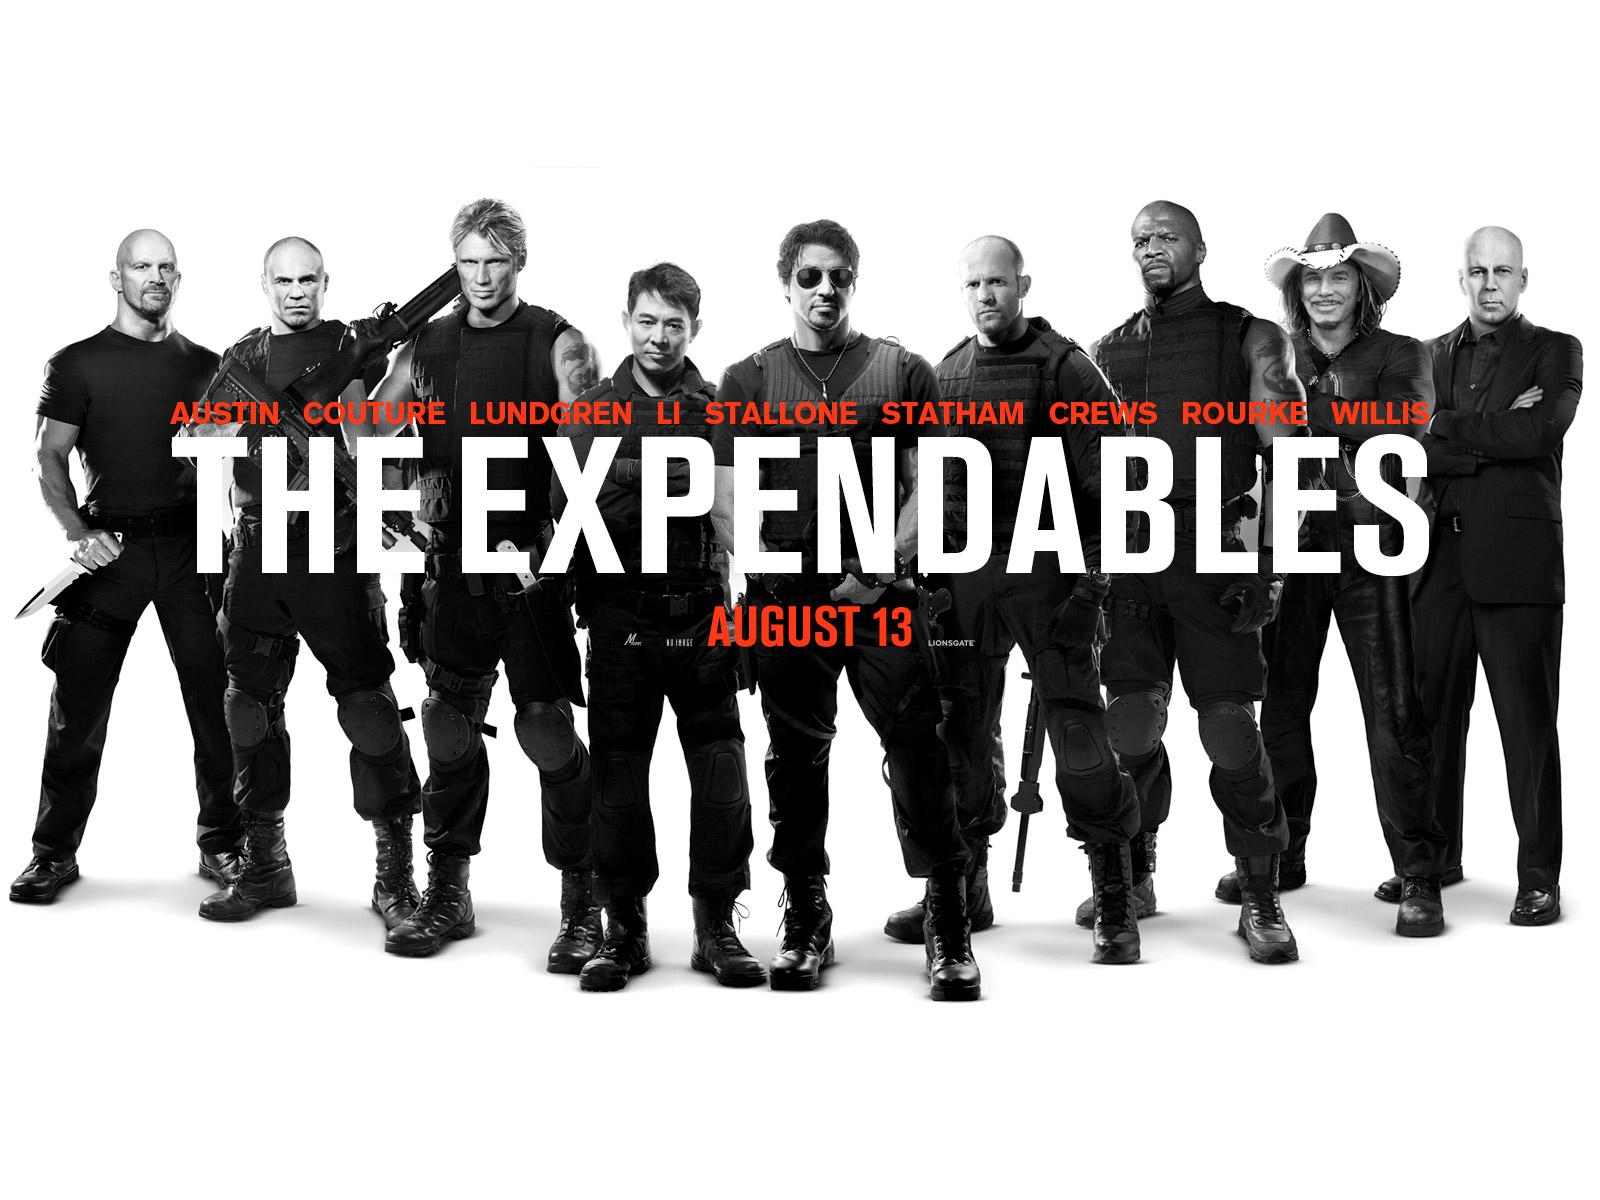 expendables review